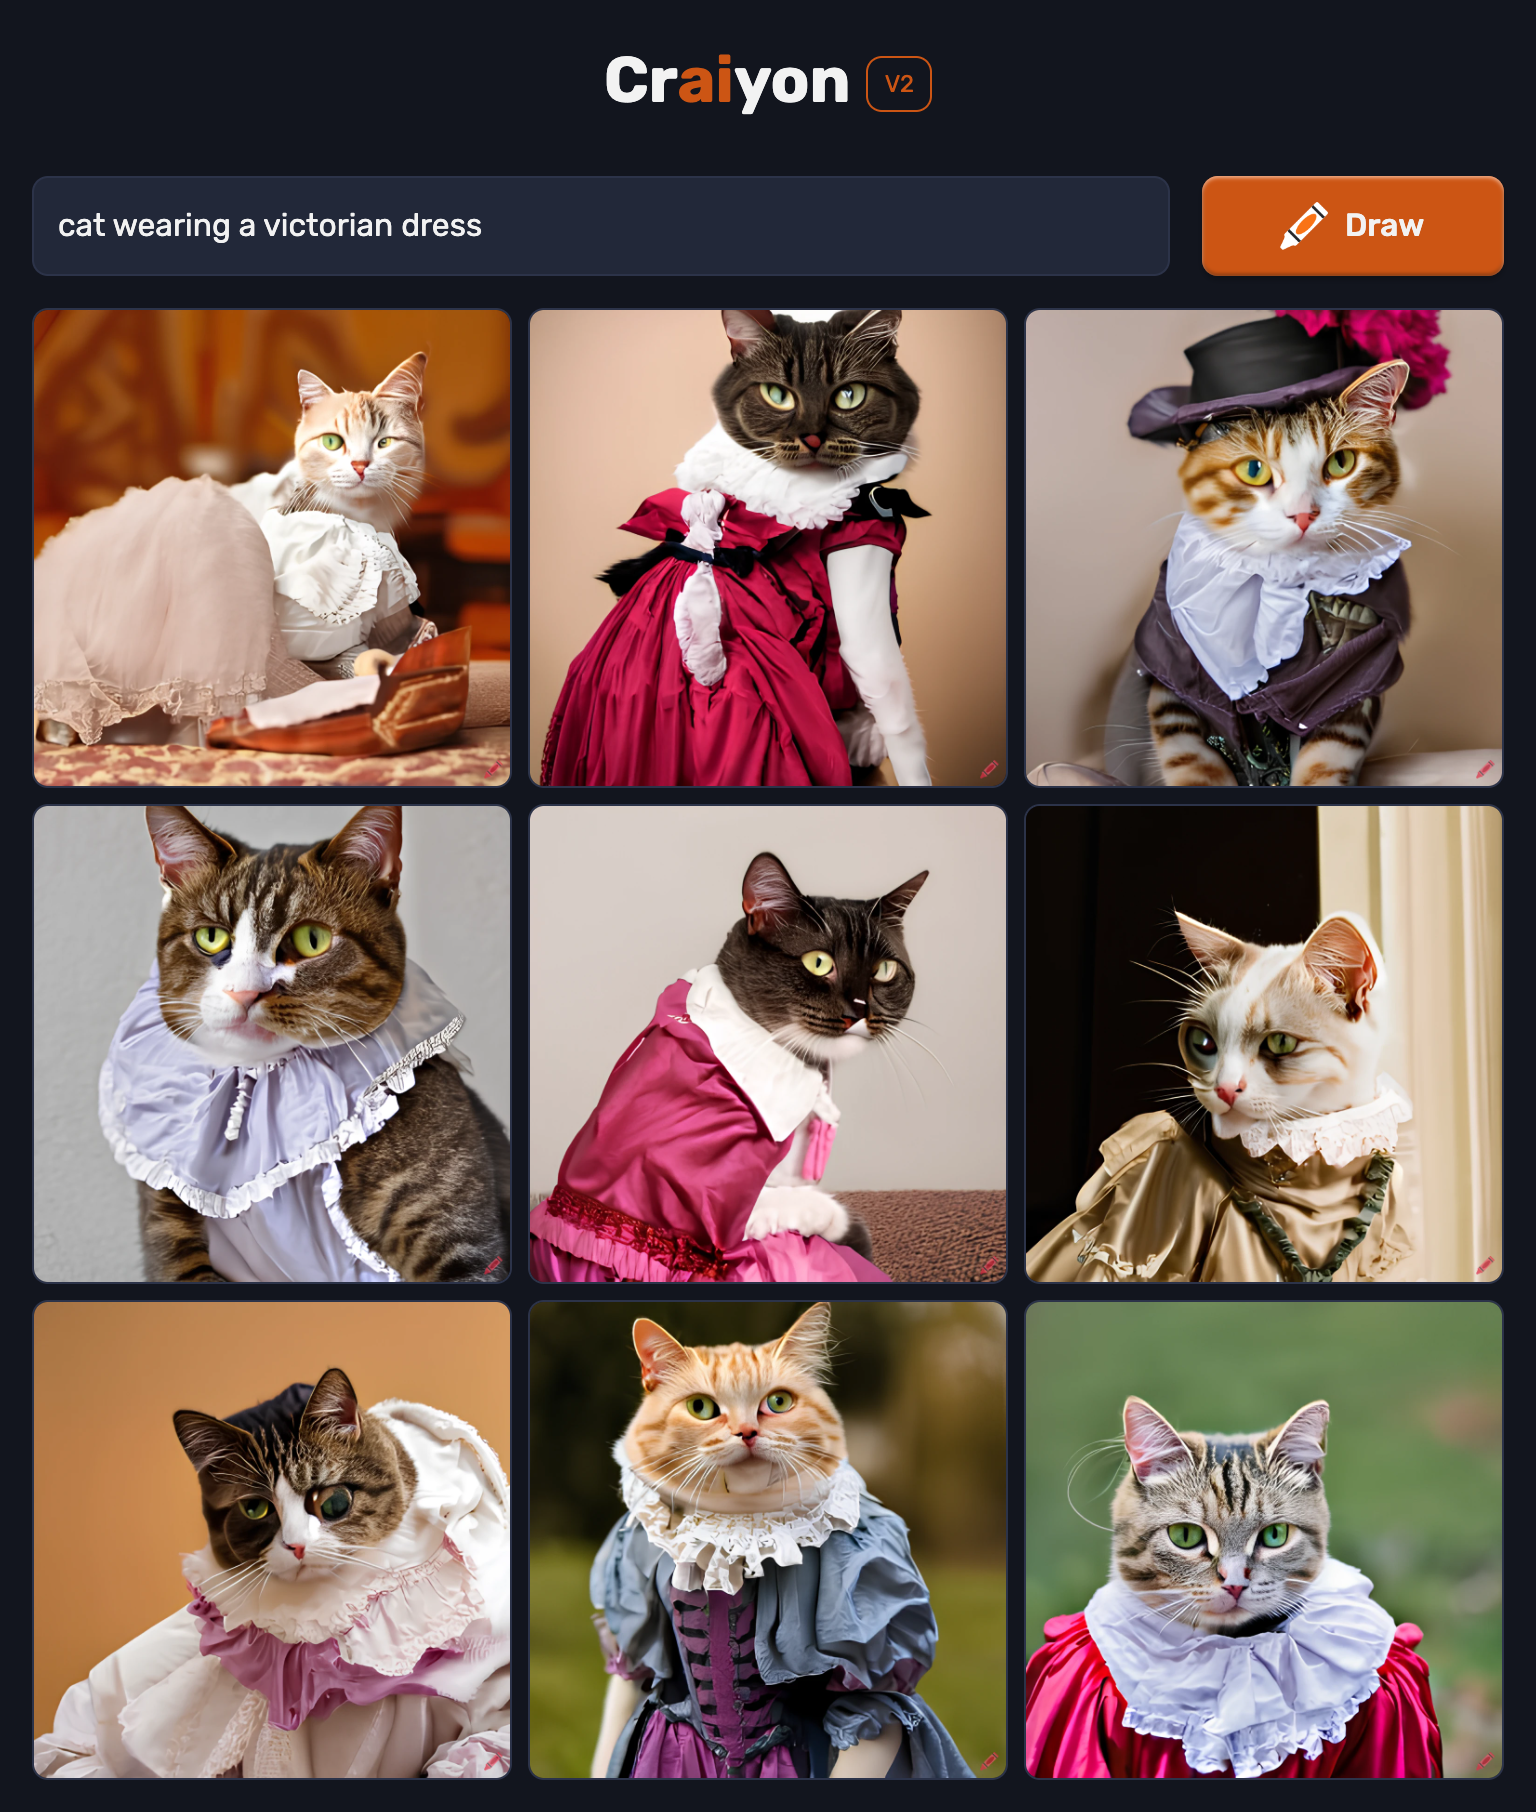 A grid of 9 computer-generated images depicting cats wearing dresses